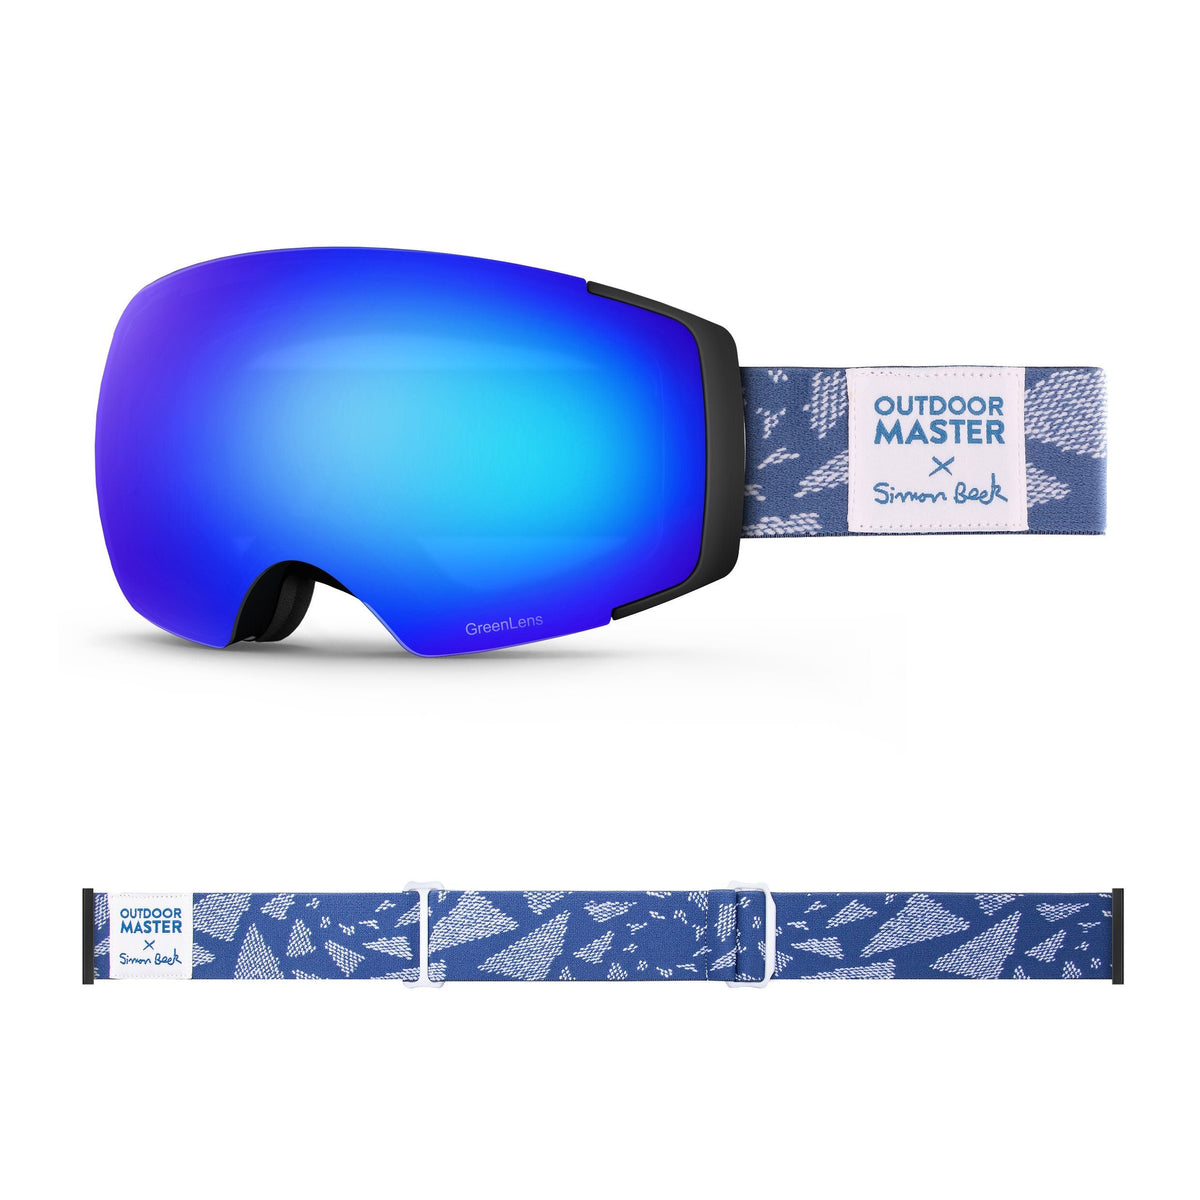 OutdoorMaster x Simon Beck Ski Goggles Pro Series - Snowshoeing Art Limited Edition OutdoorMaster GreenLens VLT 15% TAC Grey with REVO Blue Polarized Flying Triangles